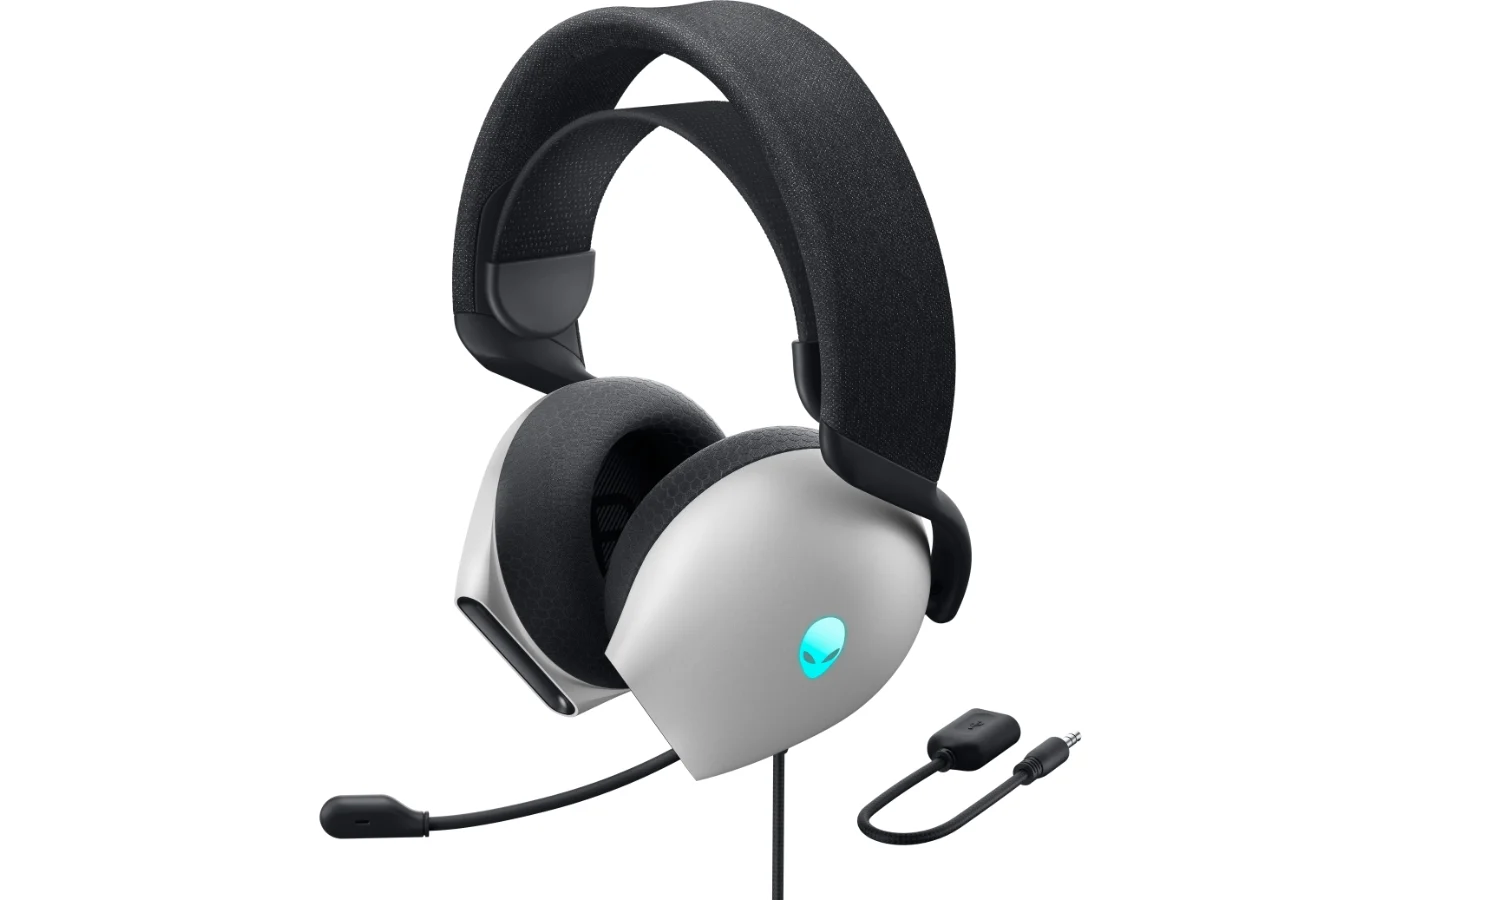 Product photo of the Alienware wired gaming headset, shot from the left front, with the bright blue alien logo on the left side.  White background.